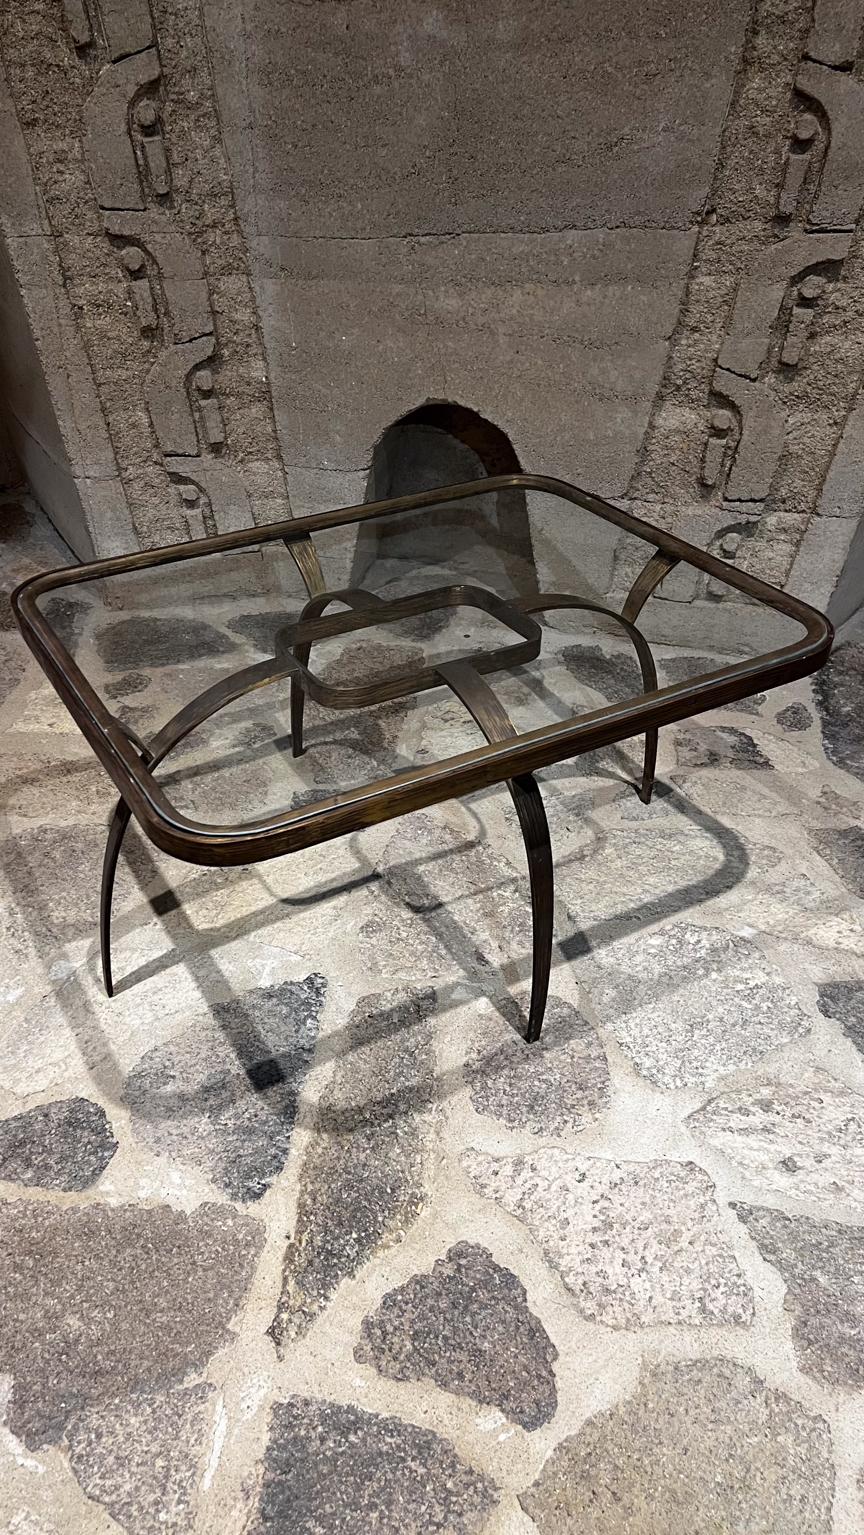 1950s Sculptural Bronze Coffee Side Table Arturo Pani Mexico City For Sale 4